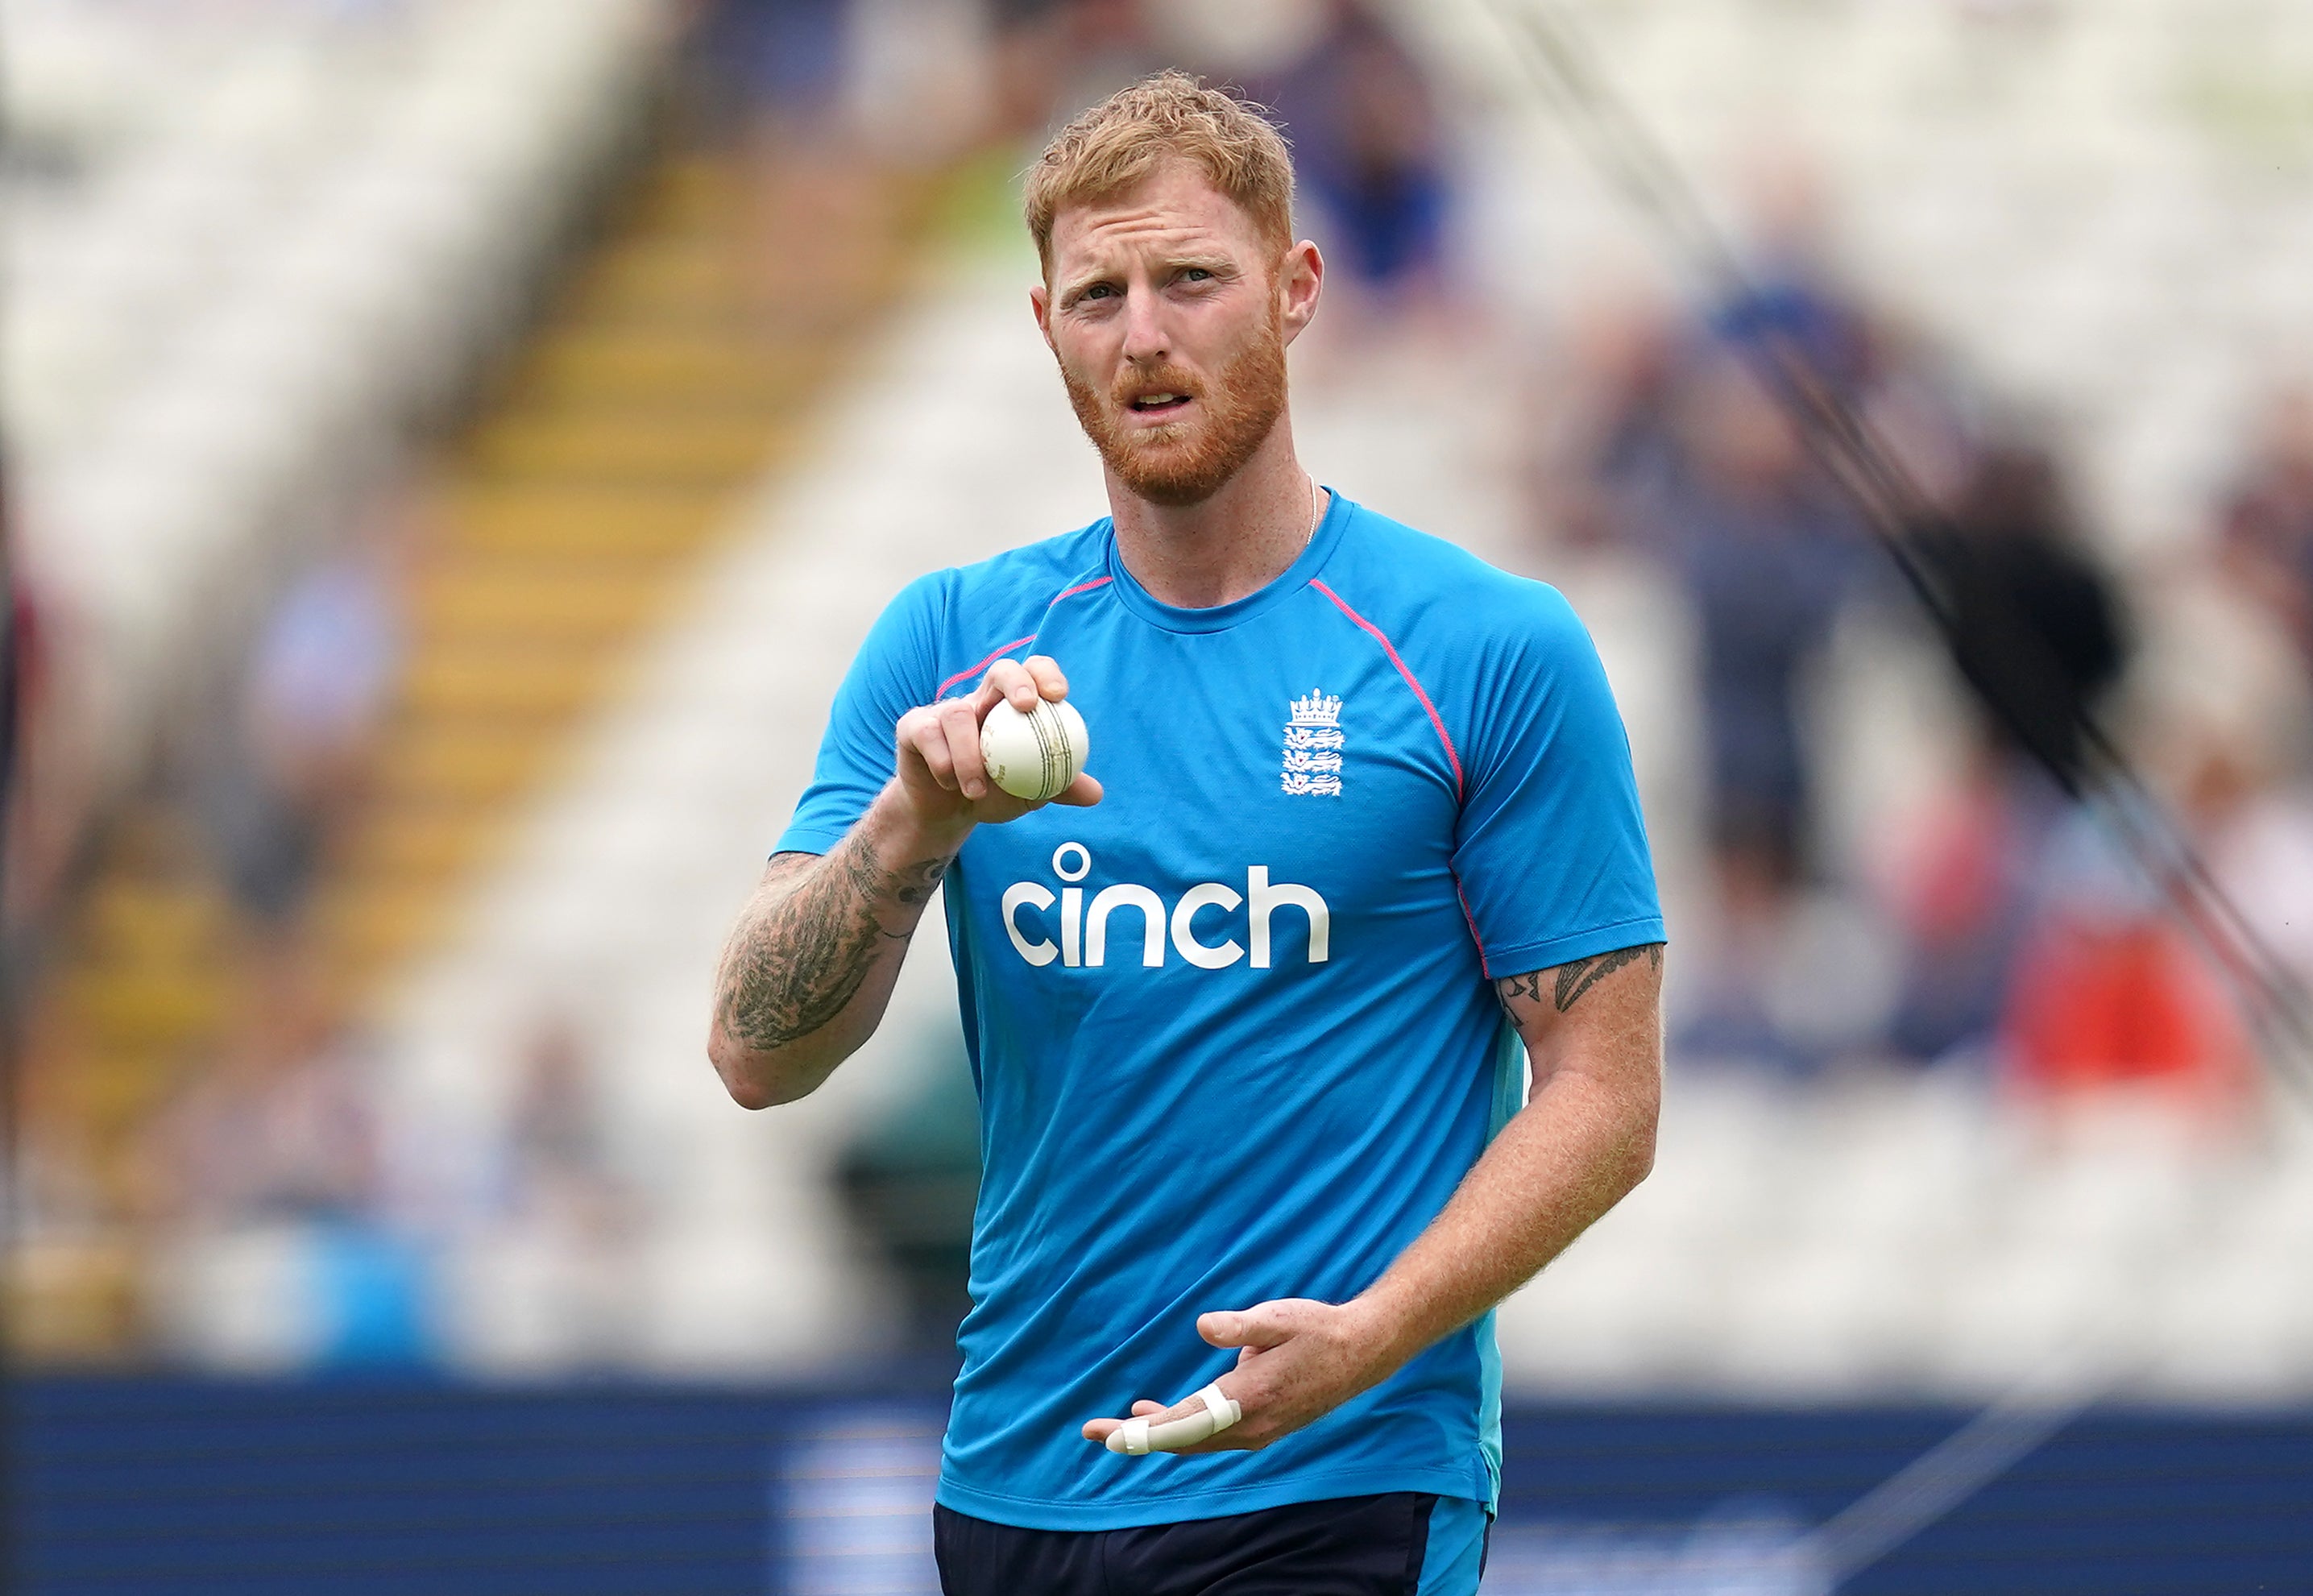 Ben Stokes has written an account of how he almost choked on a tablet as England prepare for the Ashes in Australia (Martin Rickett/PA)